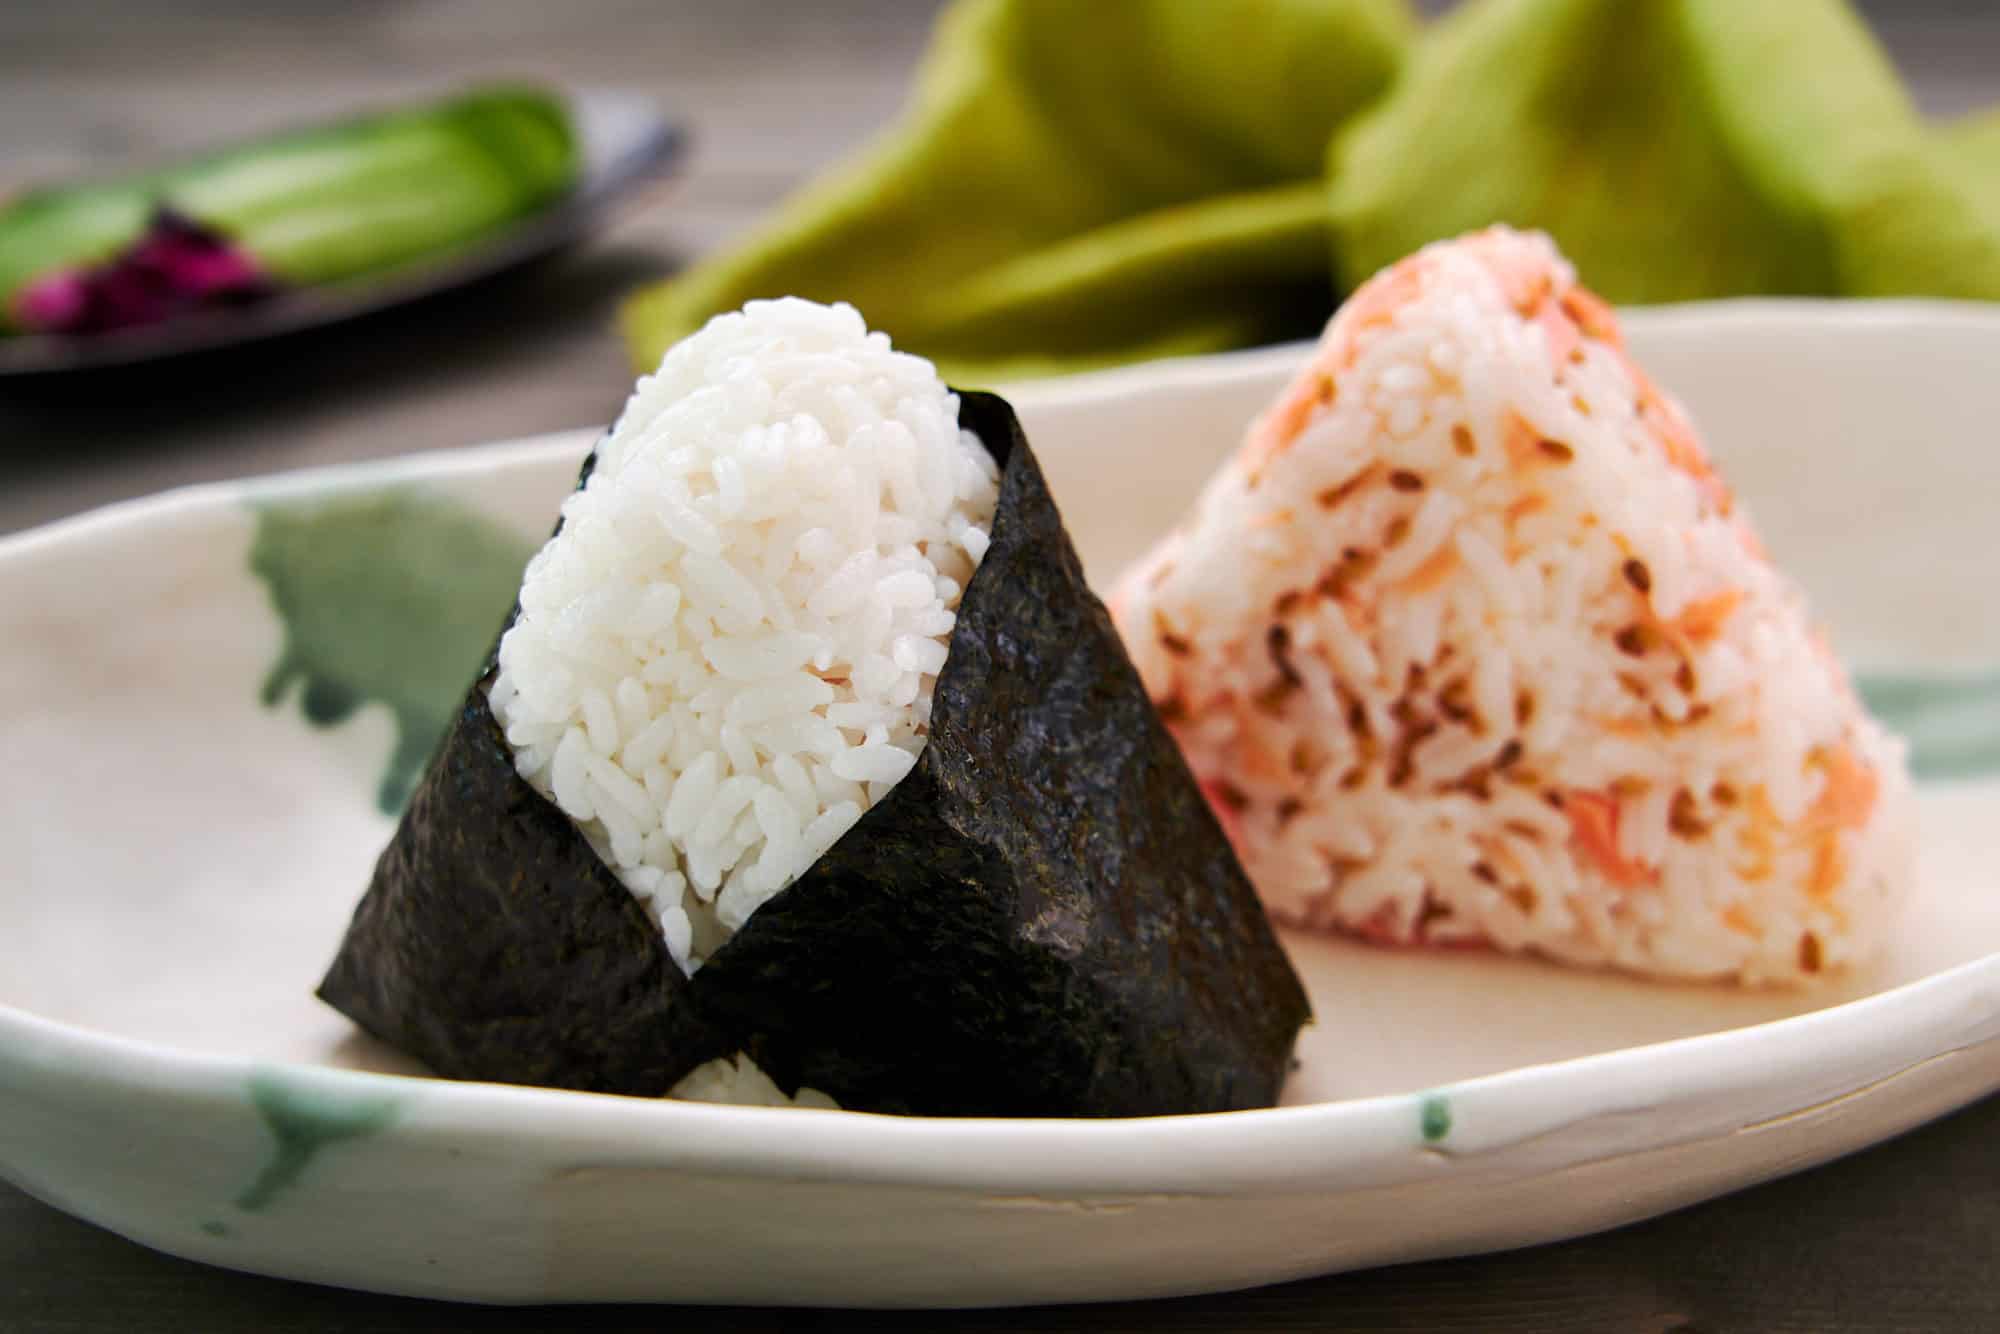 Japanese salted salmon onigiri or rice balls. One filled with salmon flakes and the other mixed with salmon.